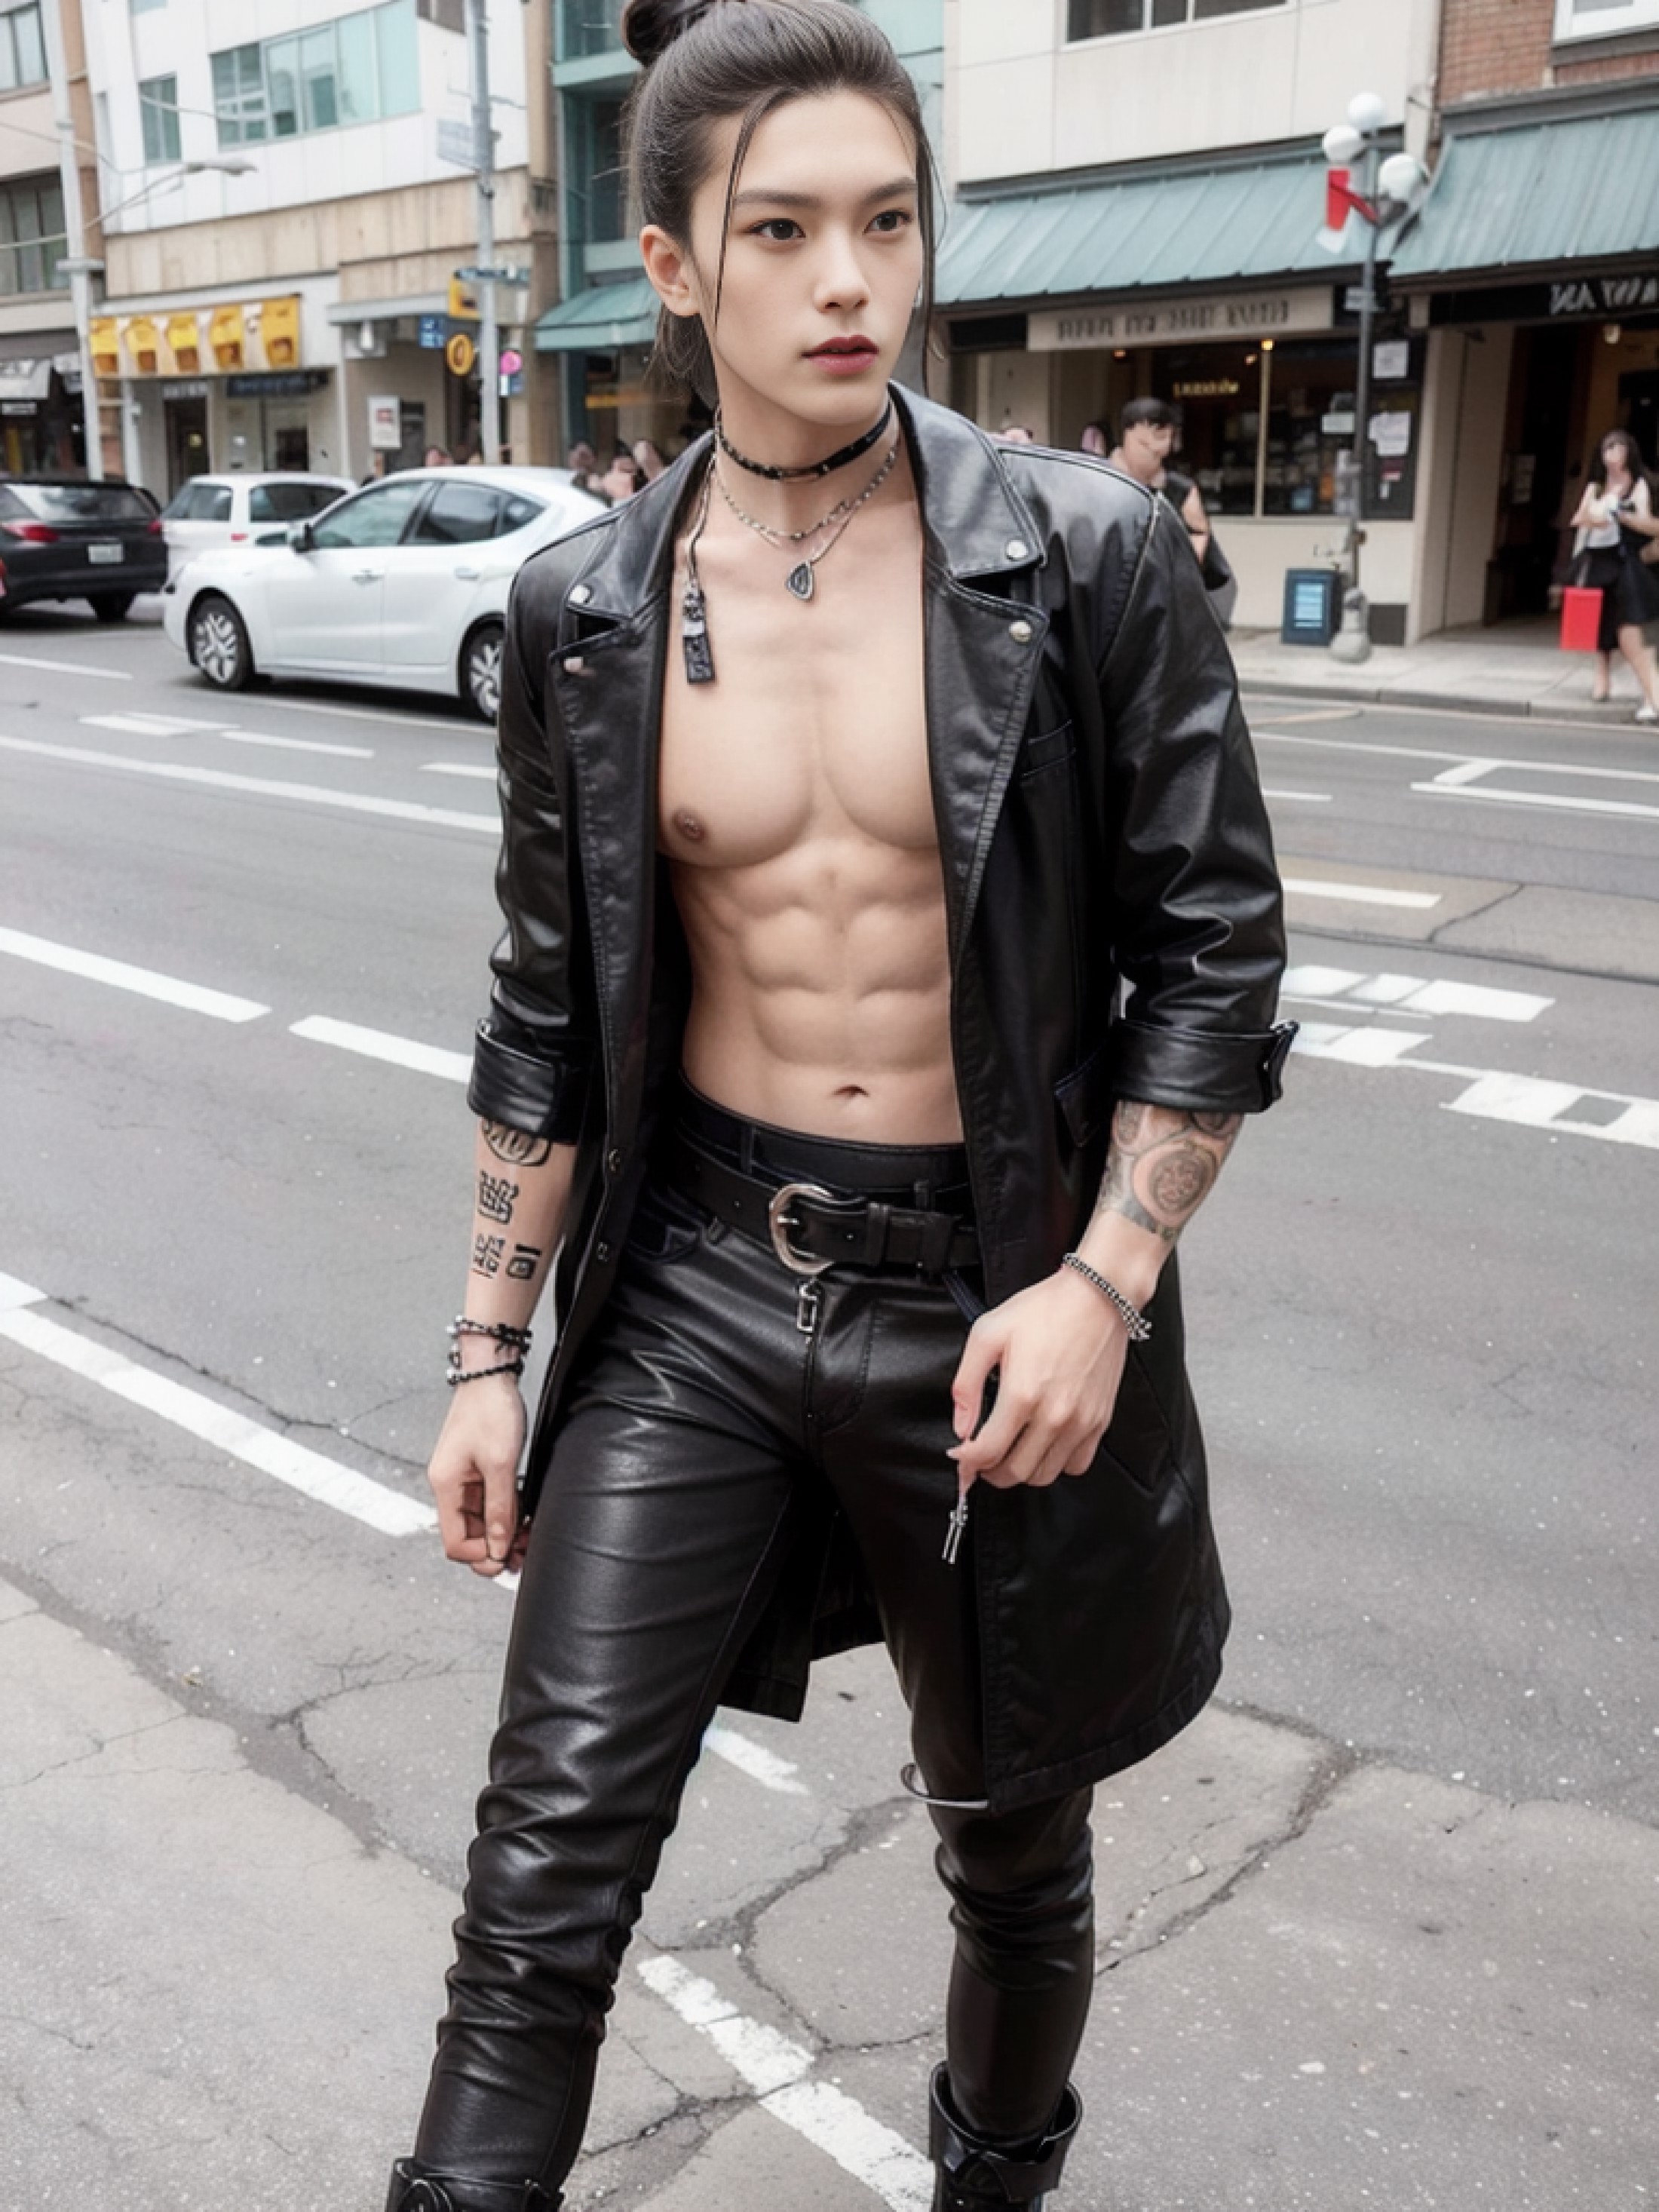 1man, solo, (no shirt),no top wear ((show abs 6 pack)), black sagged jean, skull belt, punk style, funky, skull earring, c...